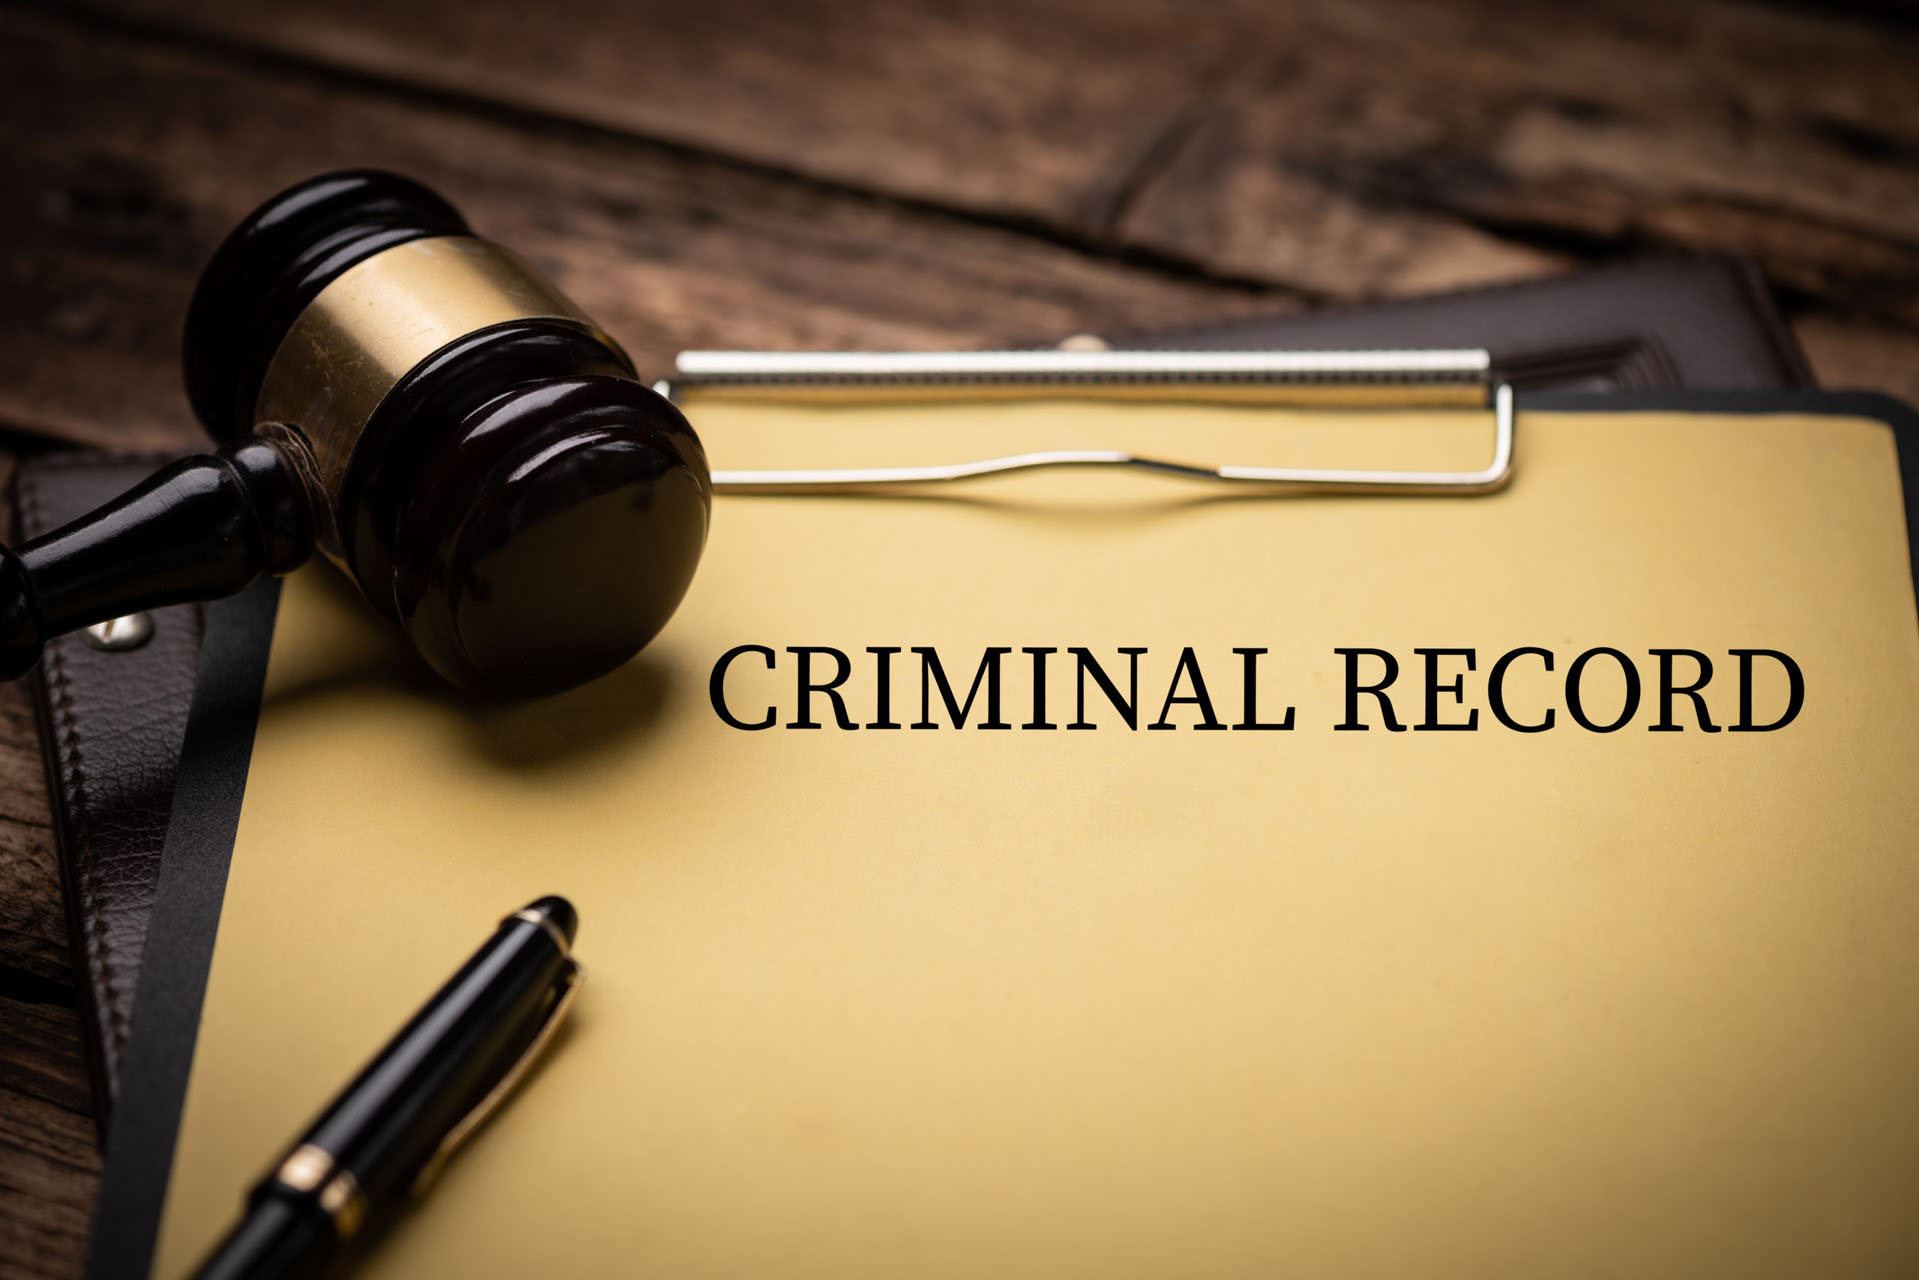 A criminal record file at a court hearing